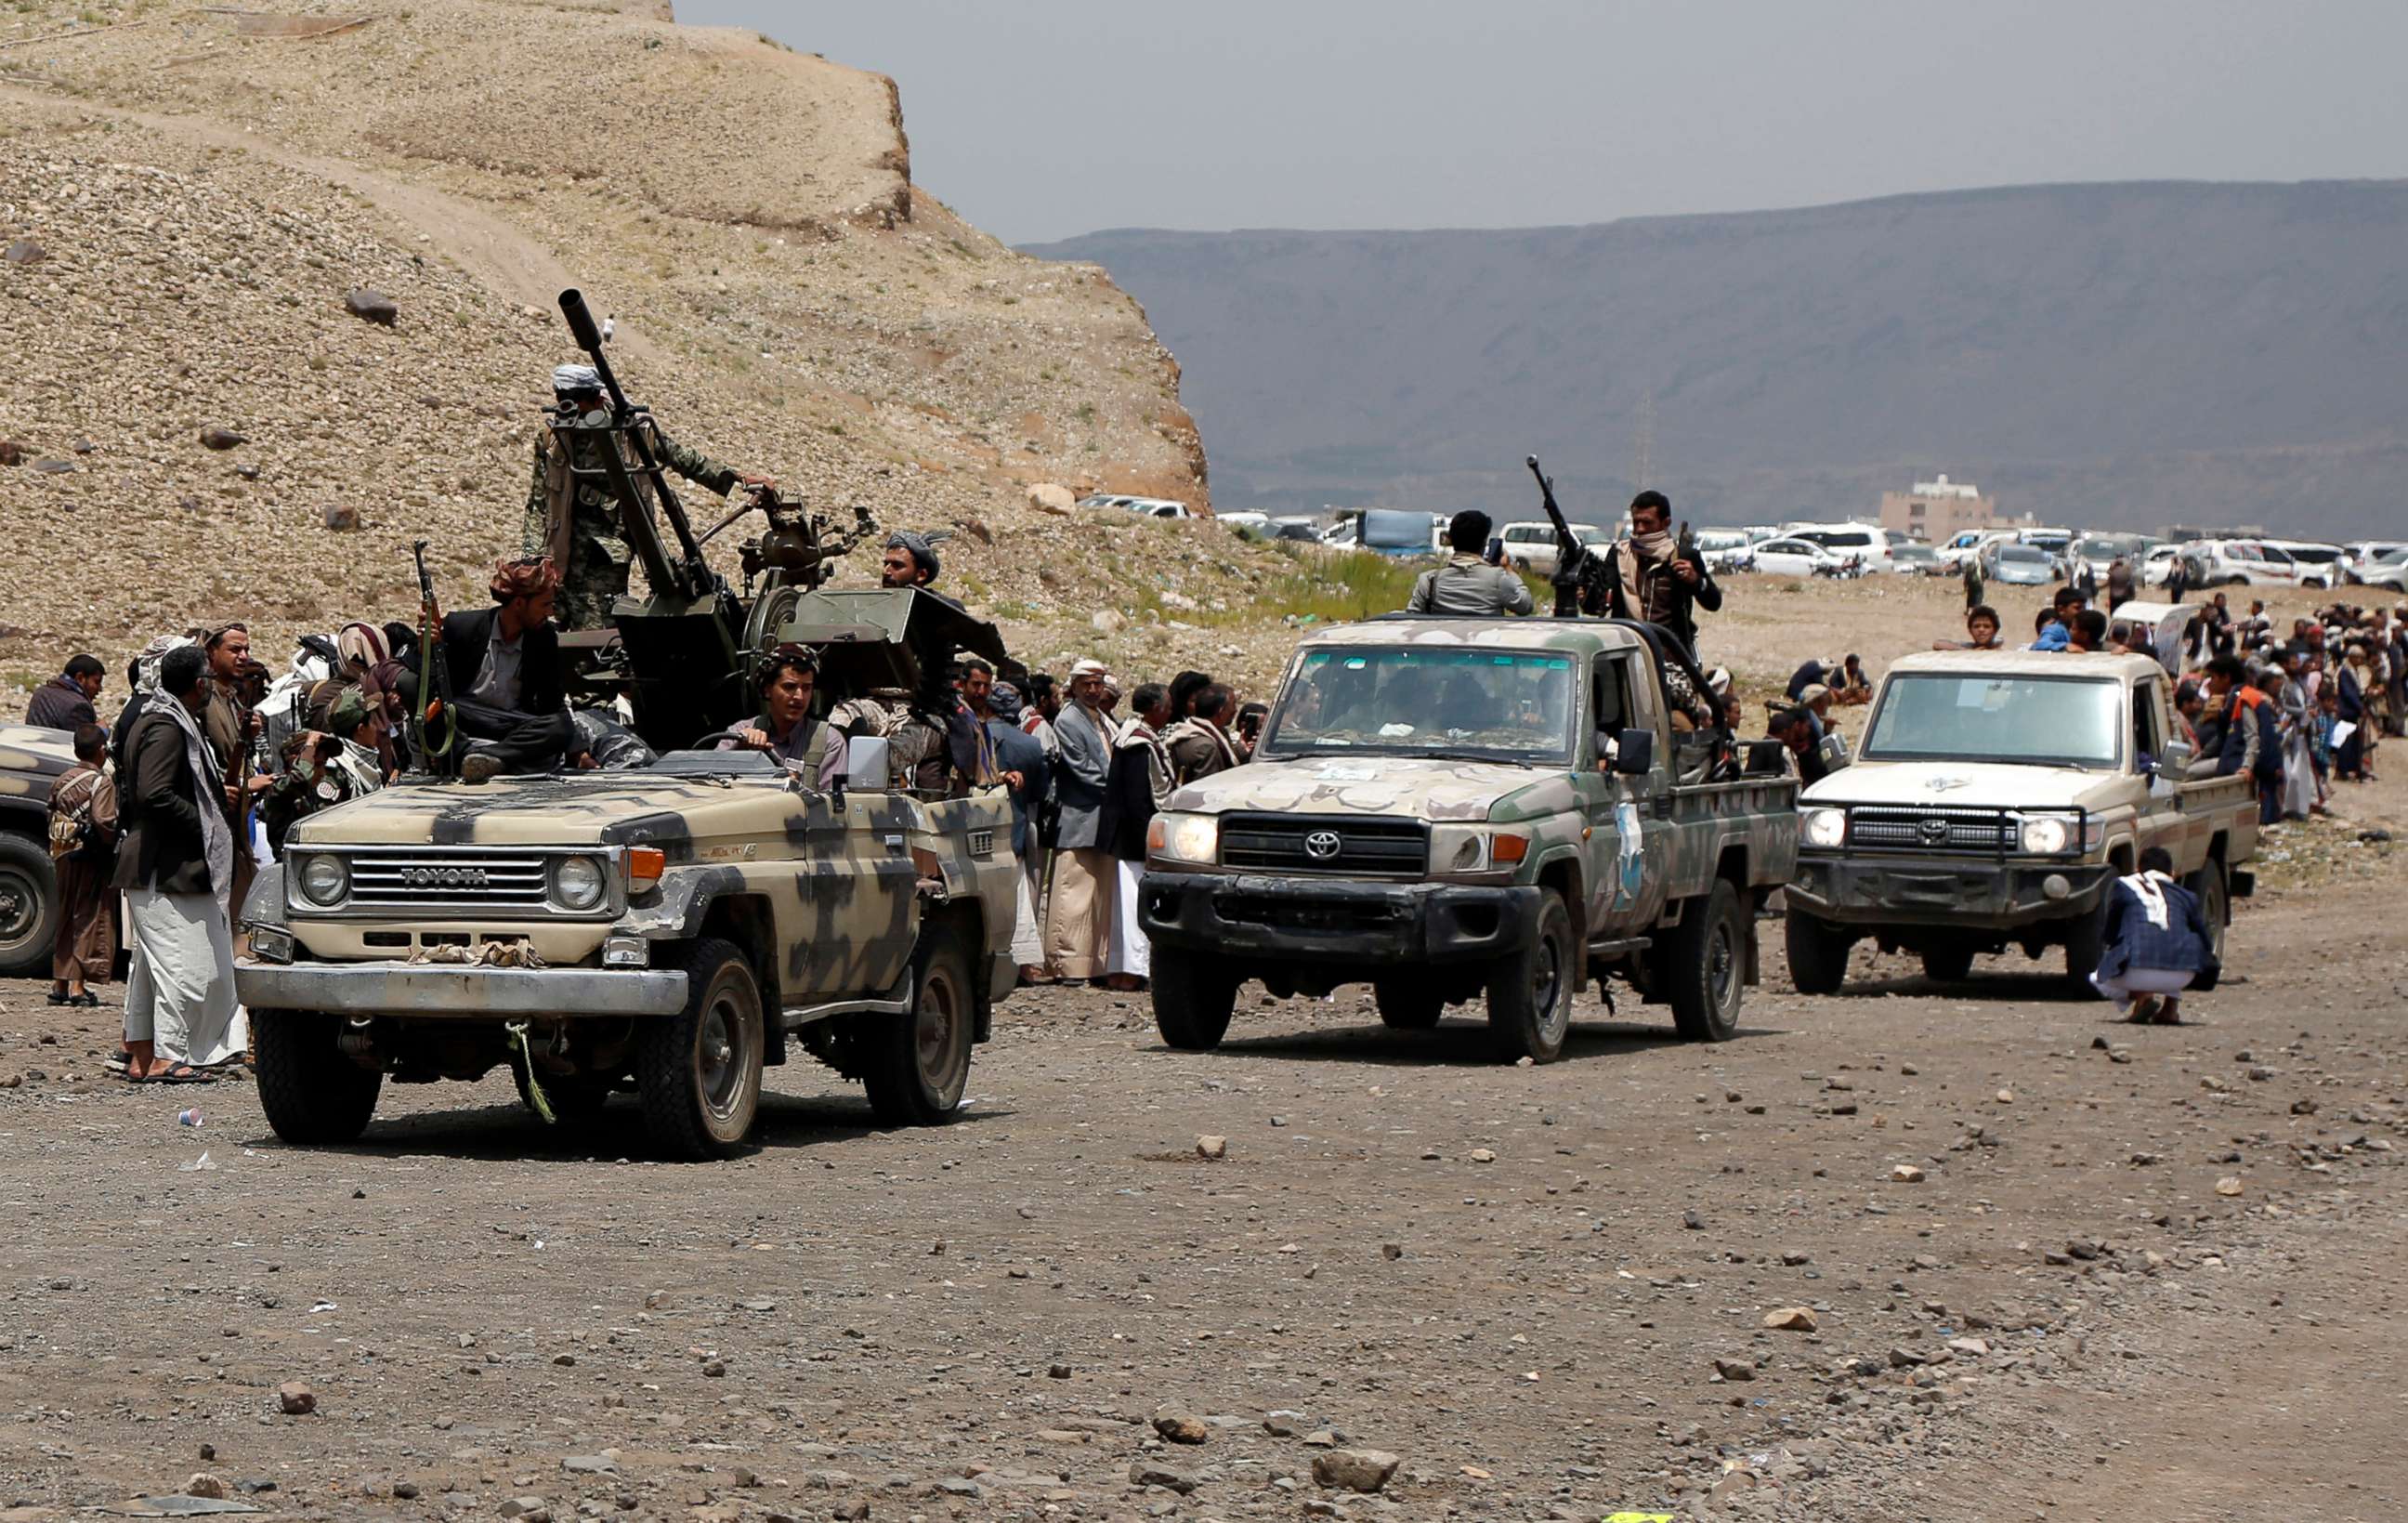 PHOTO: In this July 8, 2020, file photo, tribesmen loyal to the Houthi group ride trucks mounted with machine guns during an armed tribal gathering on the outskirts of Sana'a, Yemen.